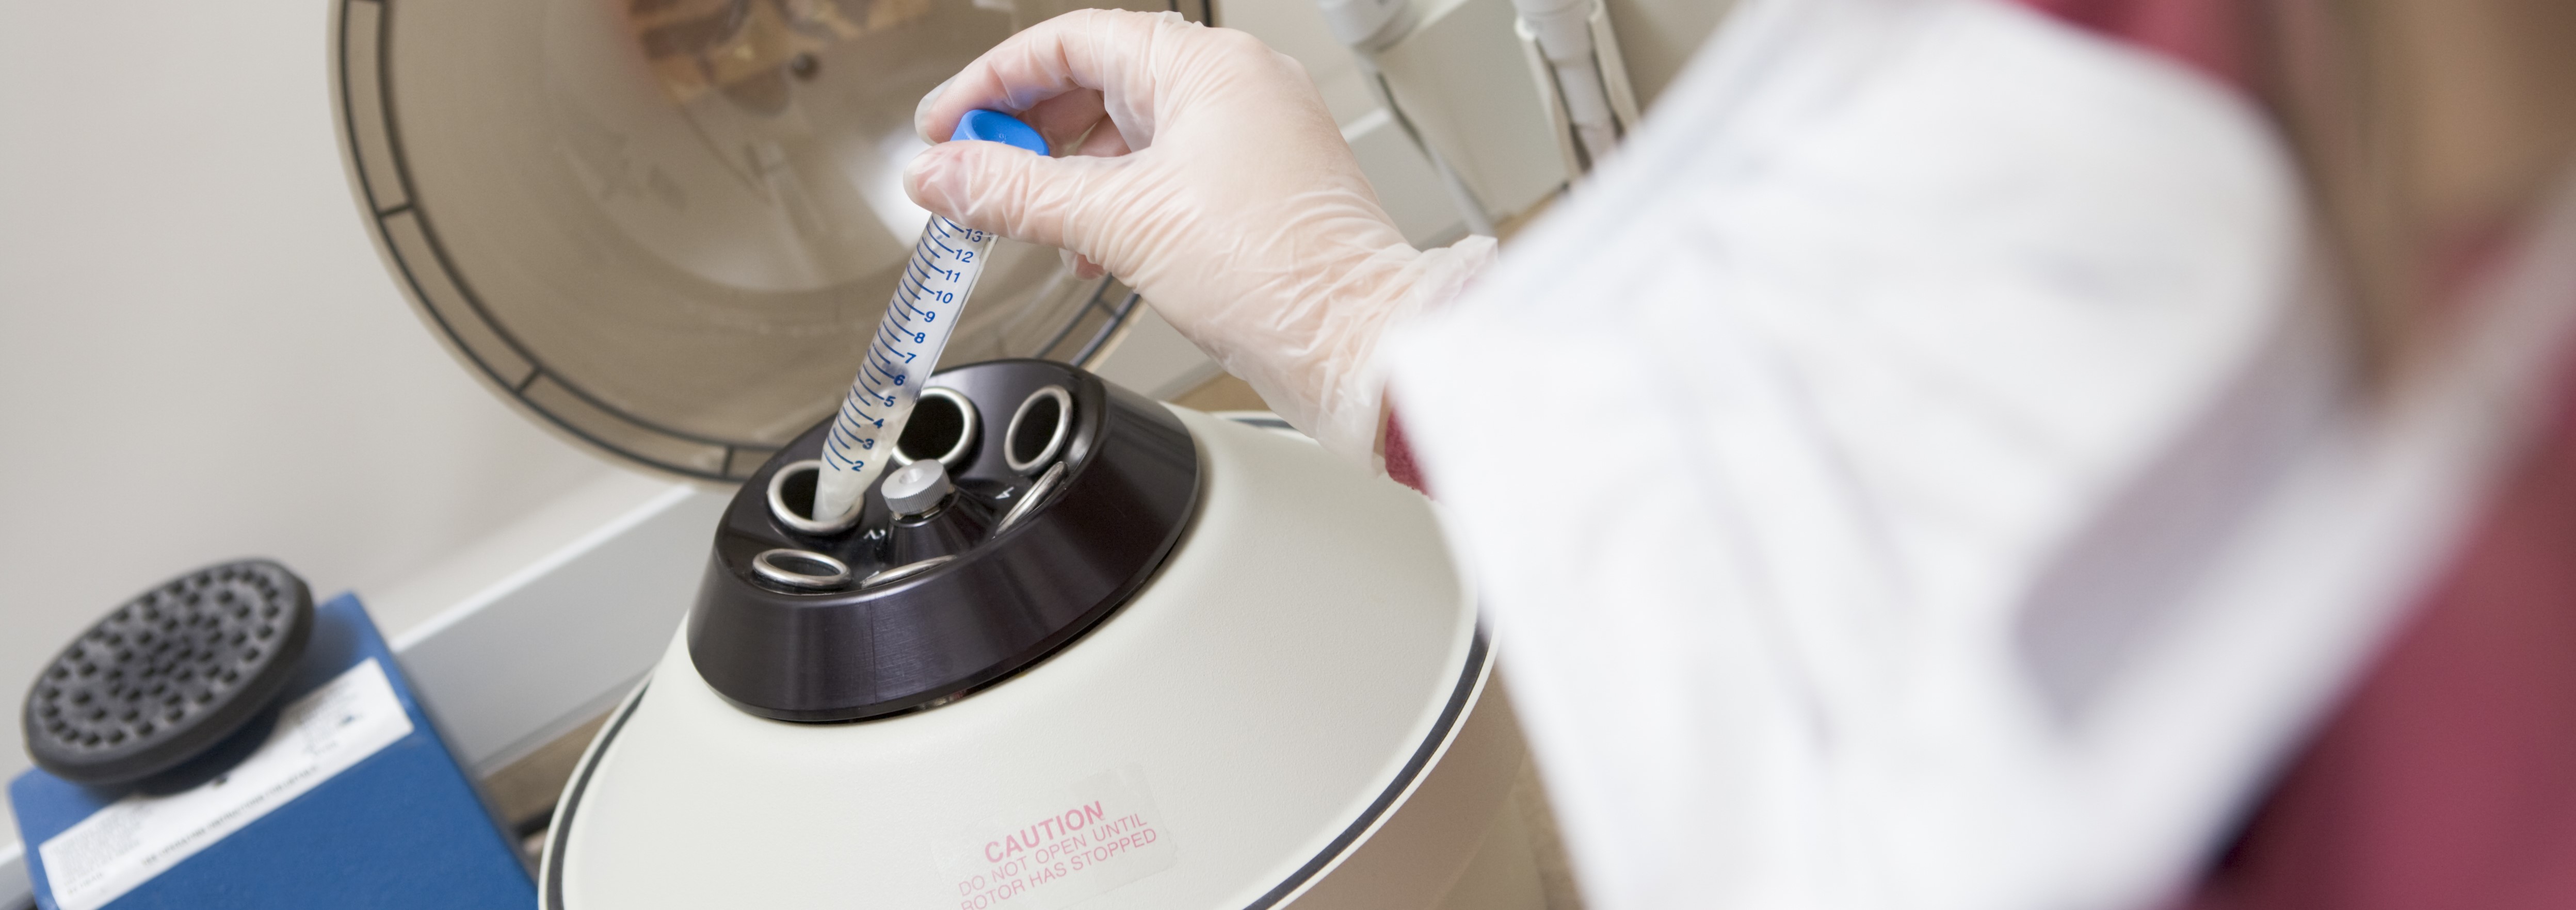 Researcher placing sample into centrifuge